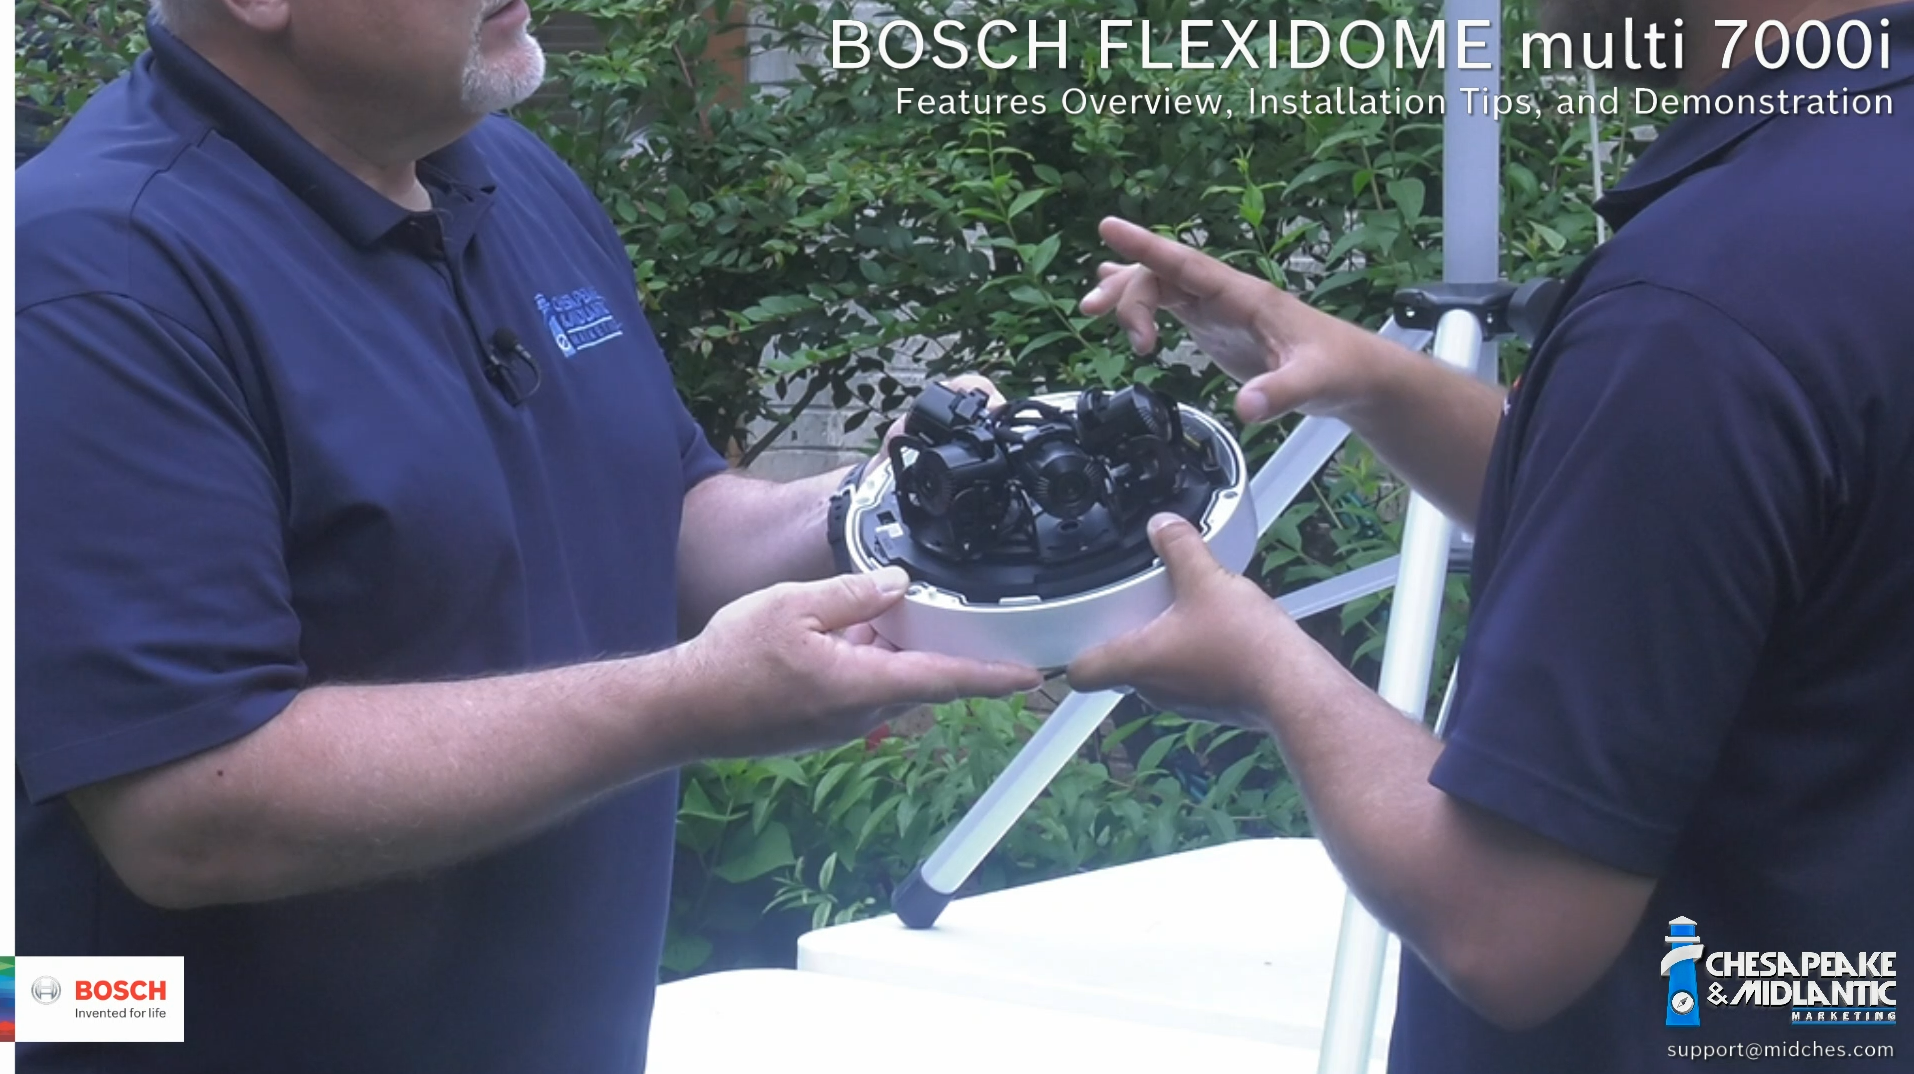 Bosch FLEXIDOME multi 7000i Features Overview and Demonstration 2